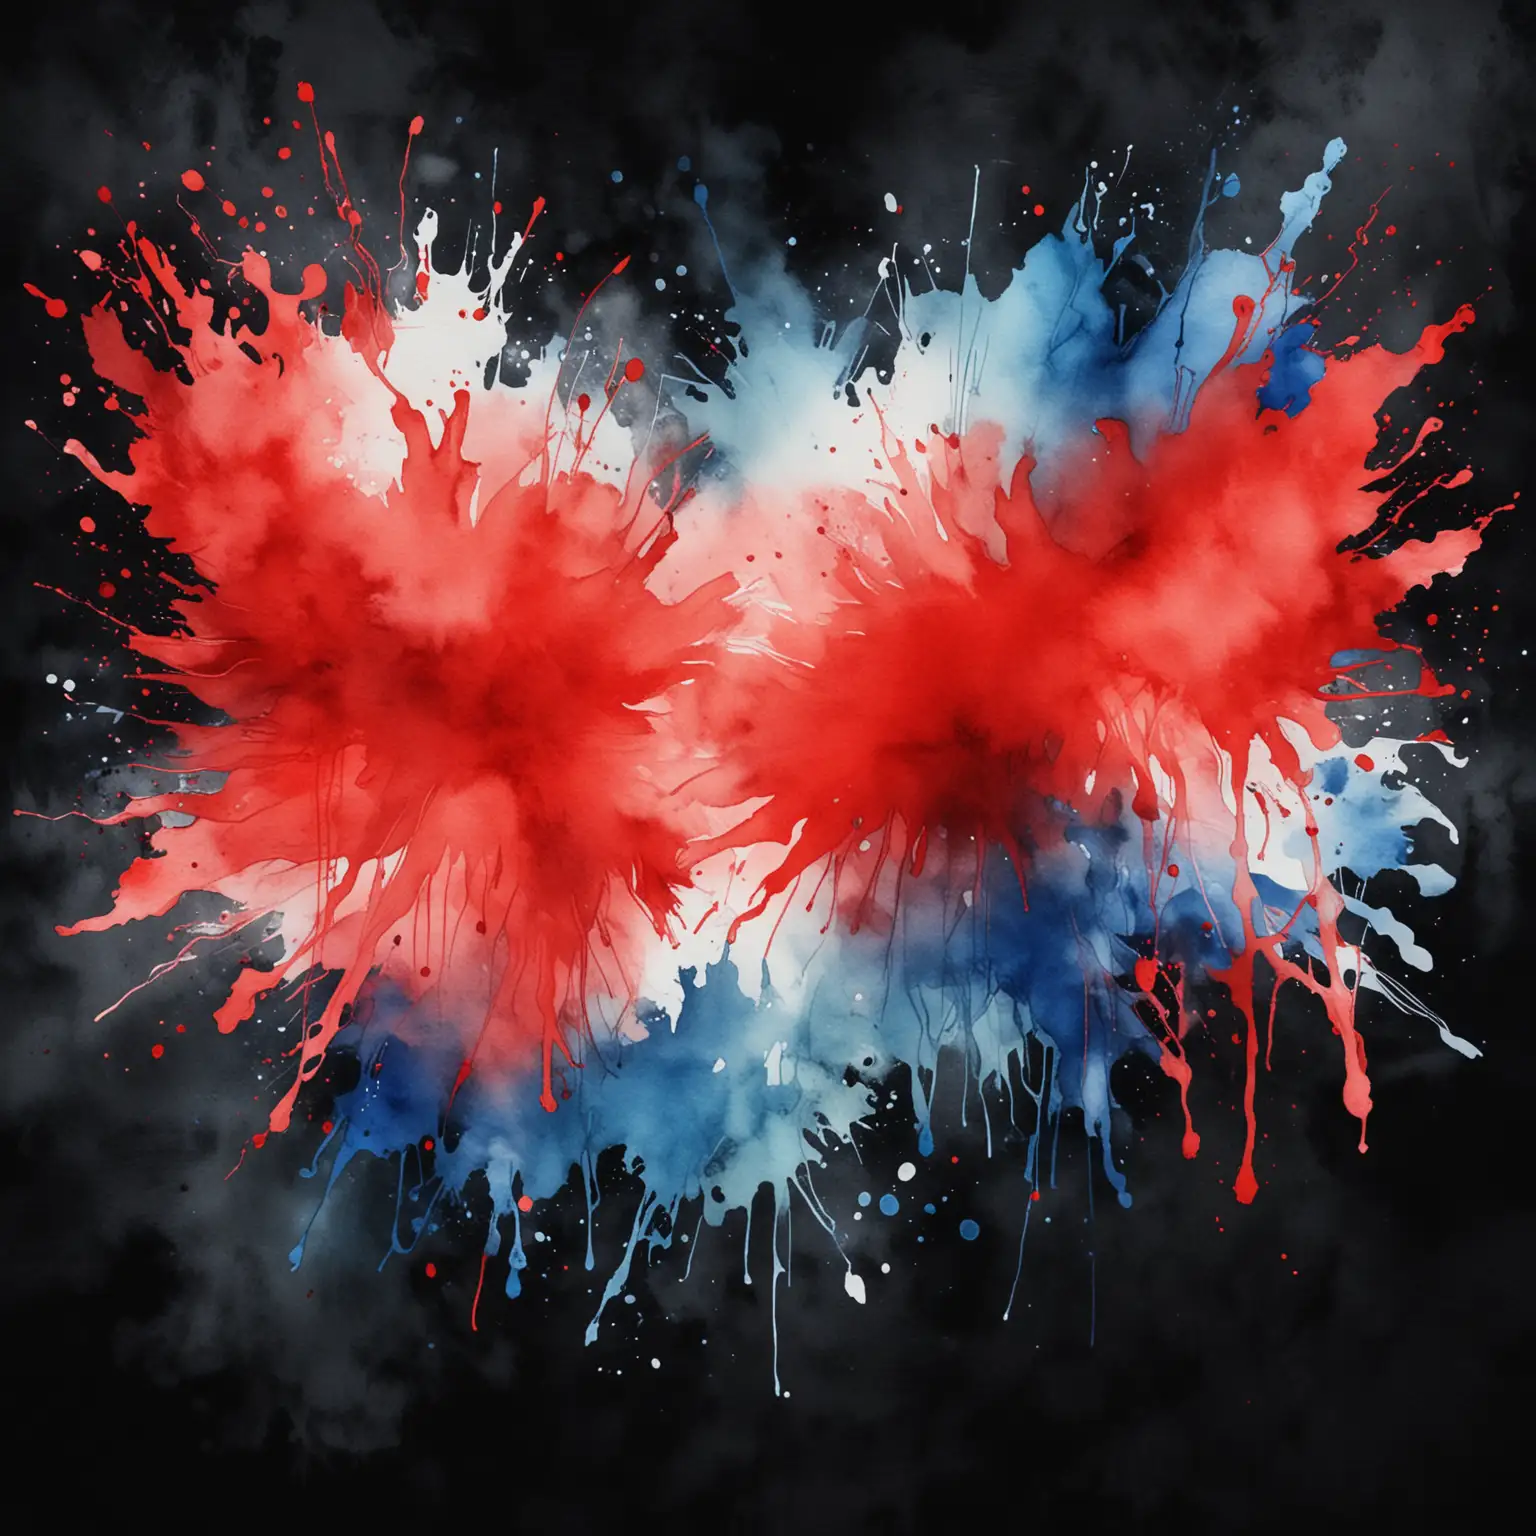 black background with a vibrant red, white and blue watercolor overlay